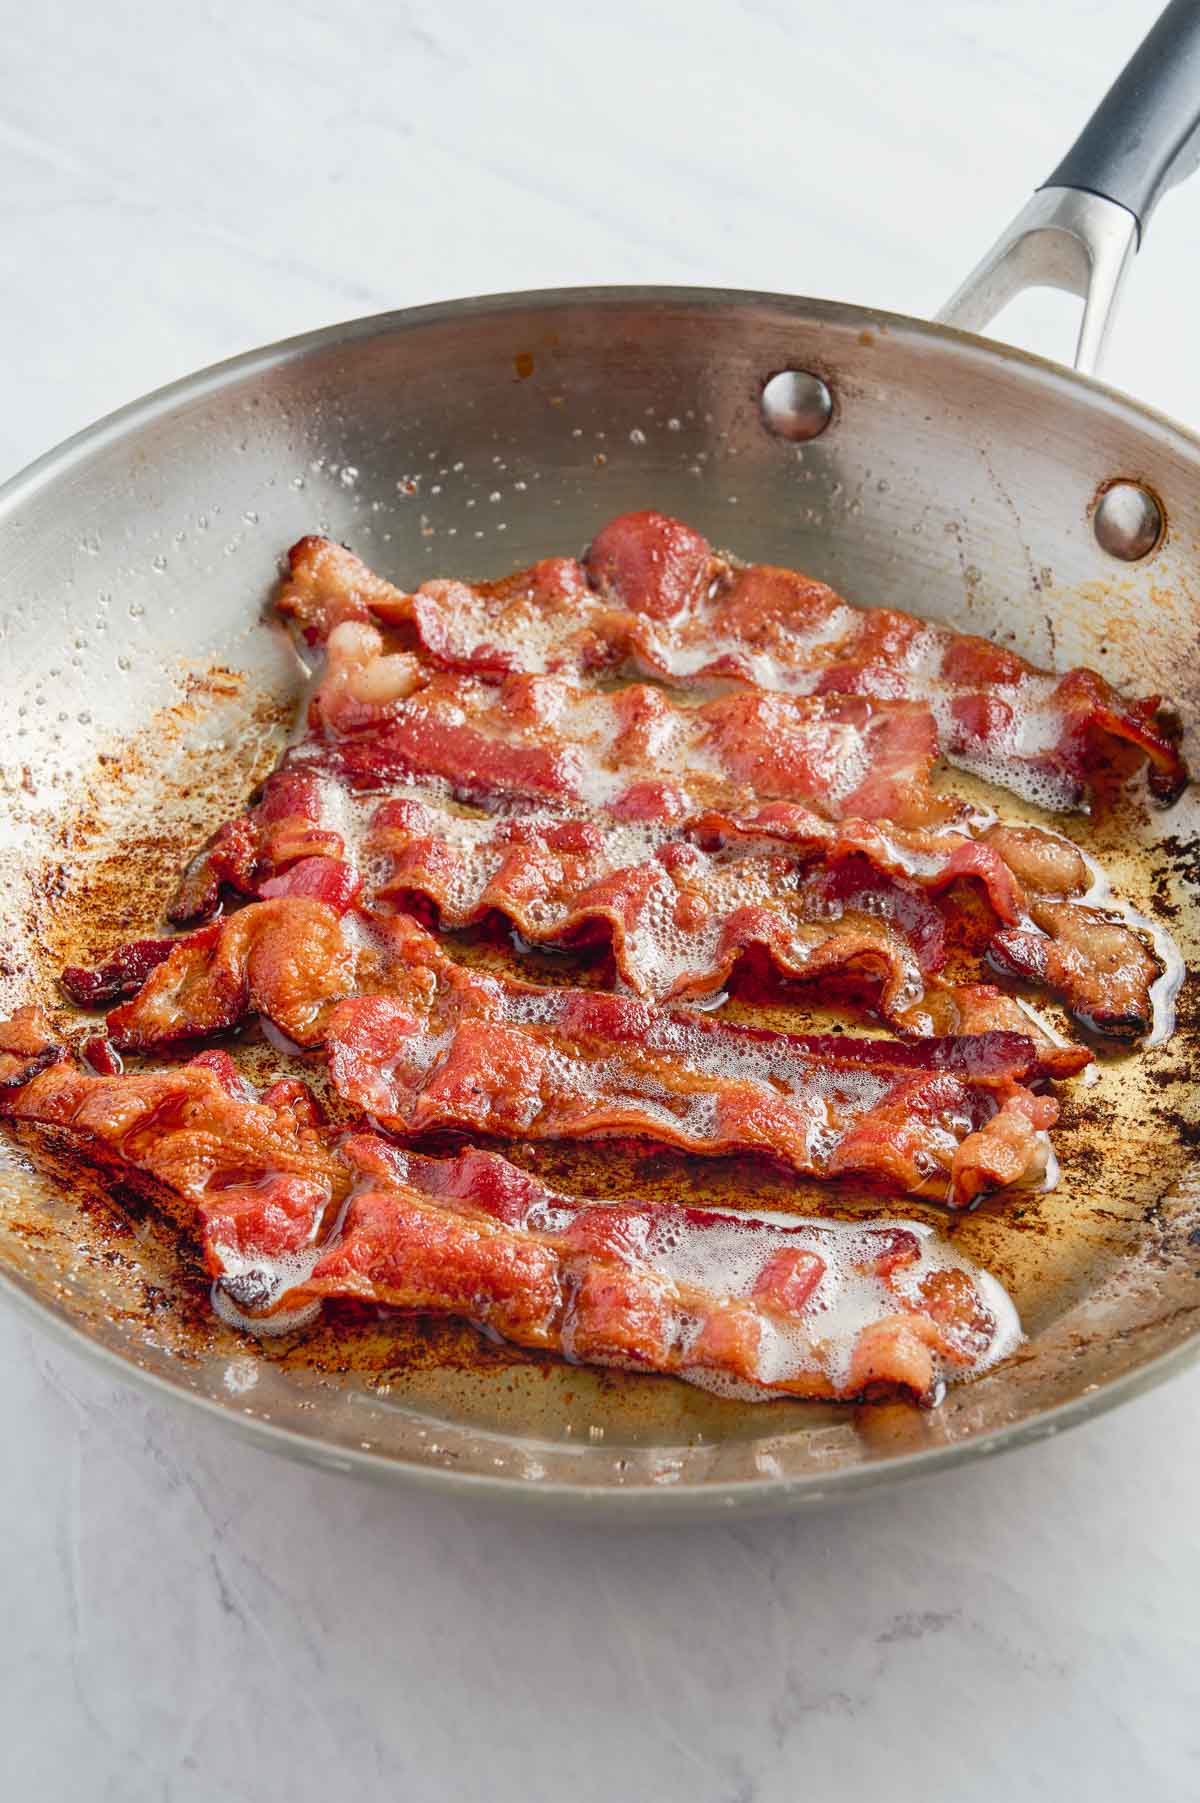 Bacon slices are cooked in a stainless steel skillet.